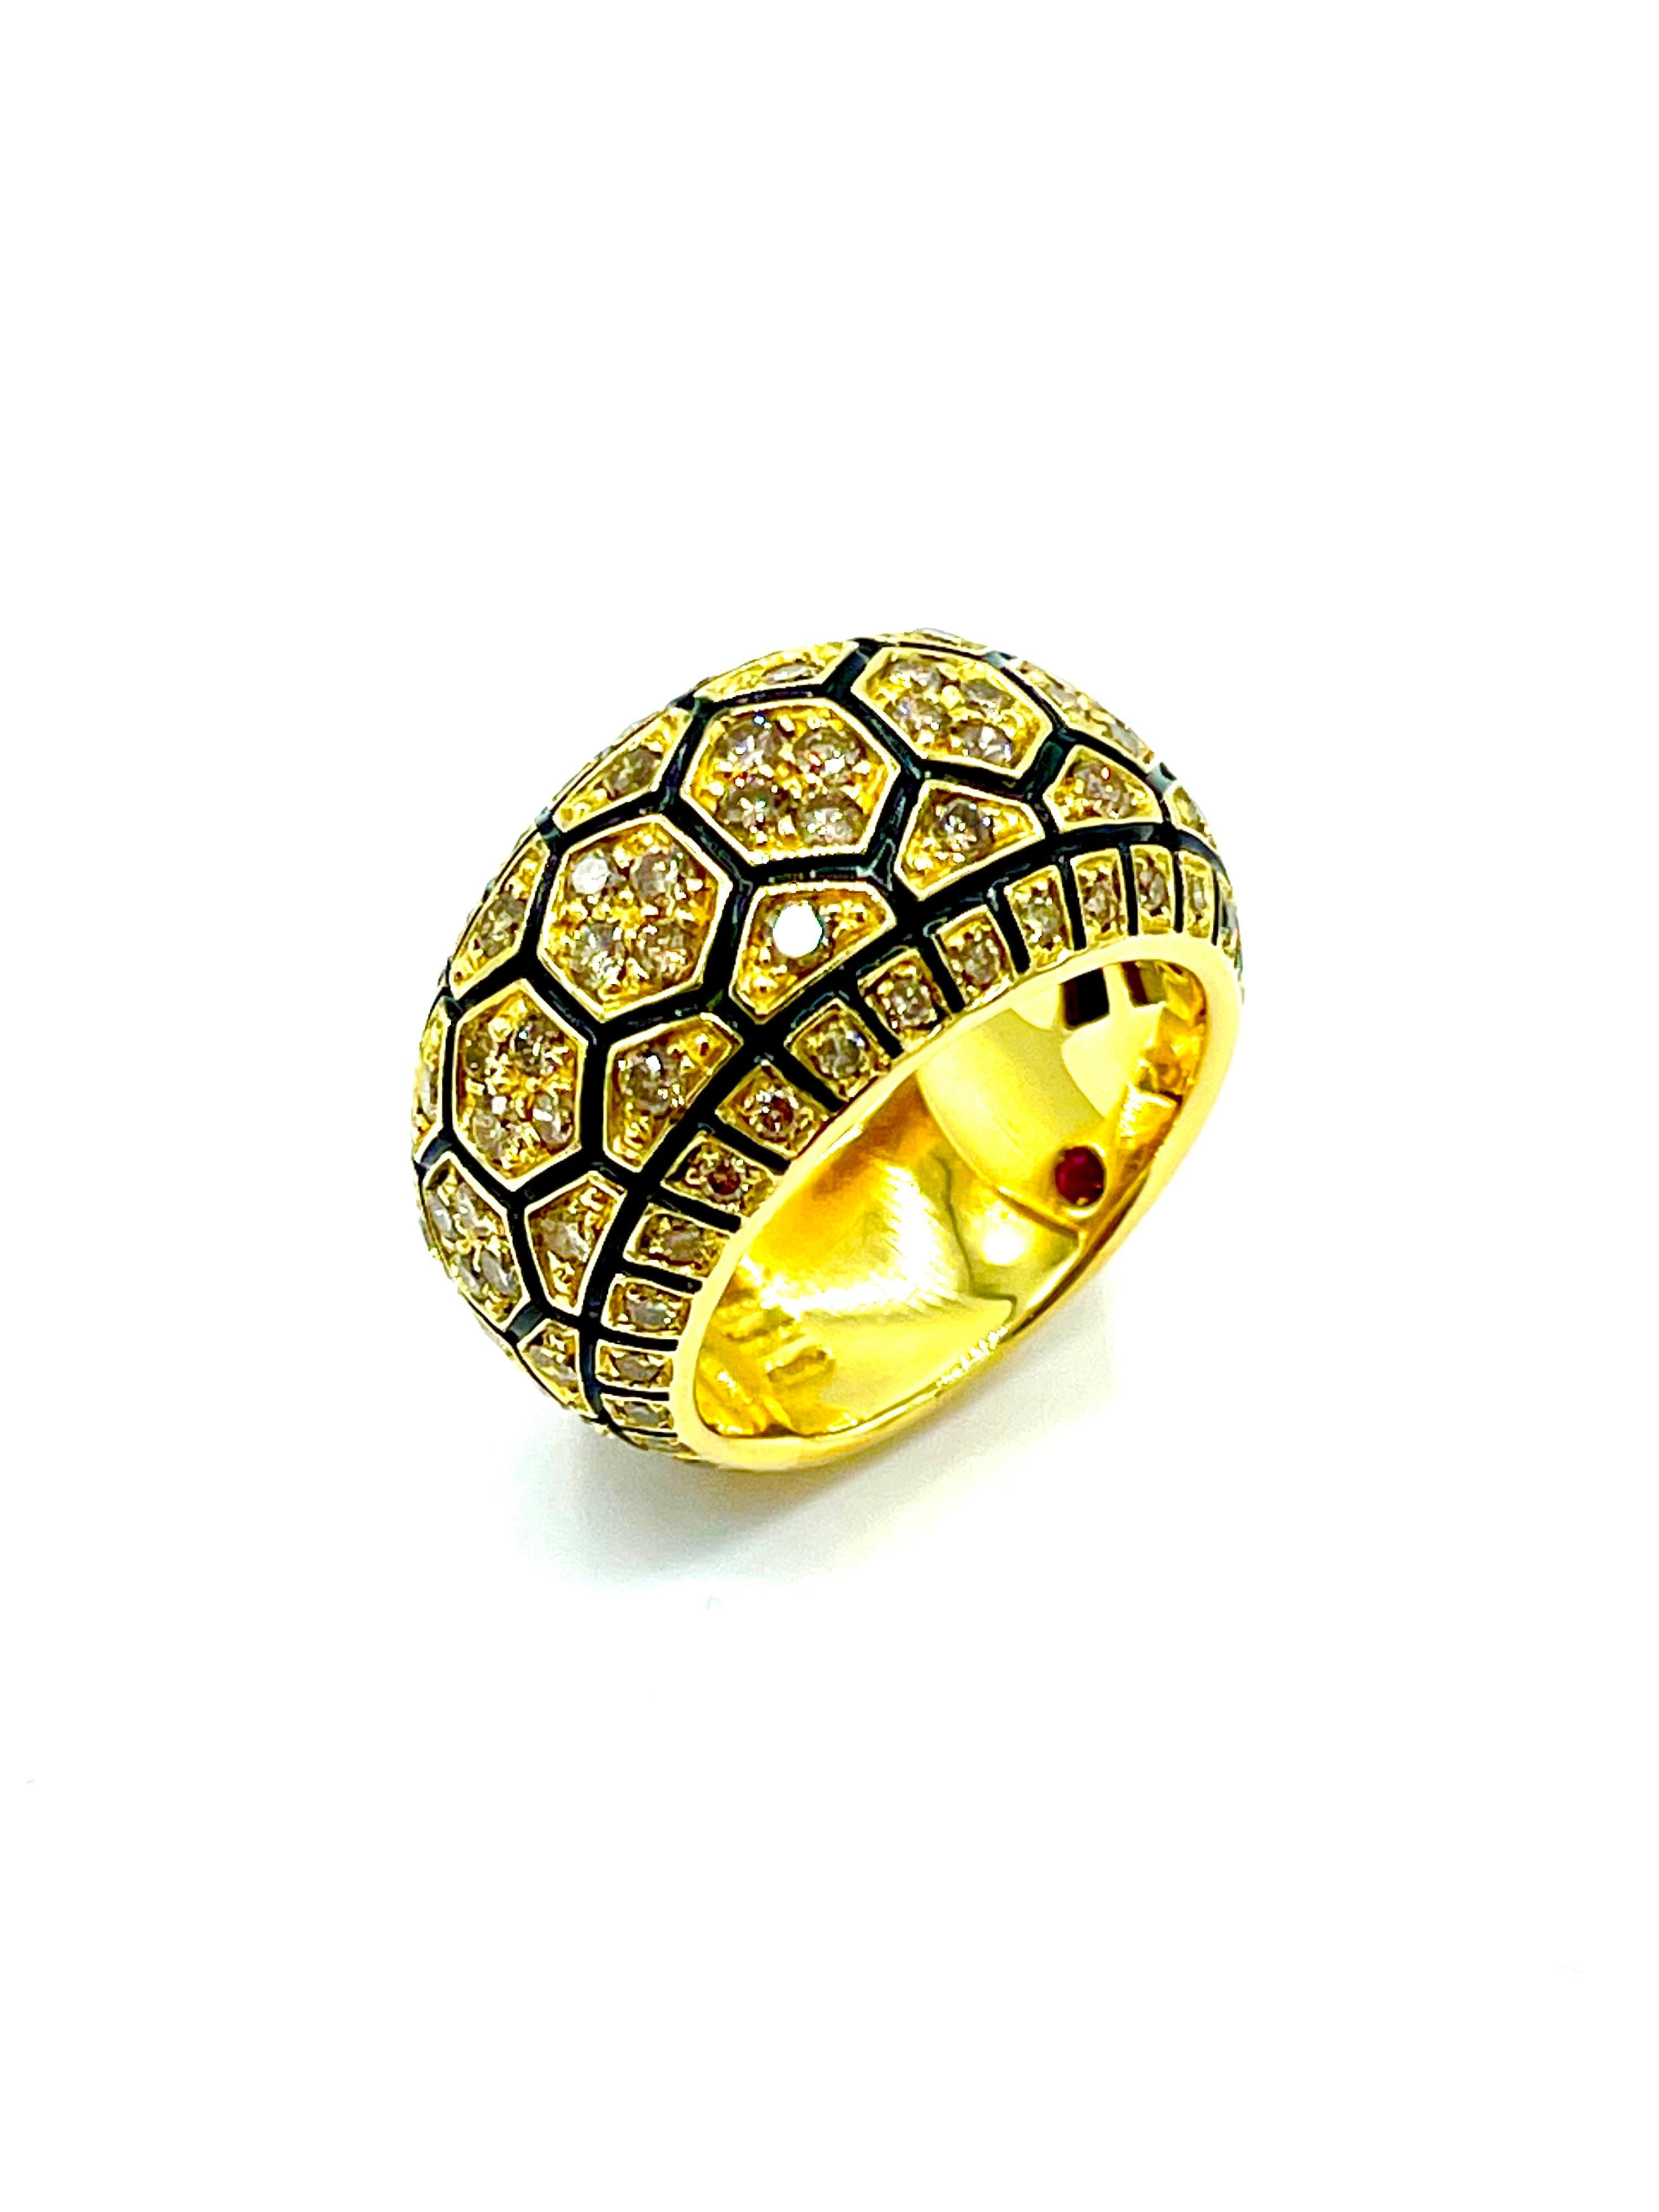 This is a fabulous ring by iconic designer Roberto Coin!  The geometric design of the ring is highlighted by 1.05 carats in round brilliant champagne Diamonds set in 18K yellow gold, with black enameling in the channels between the Diamond stations.